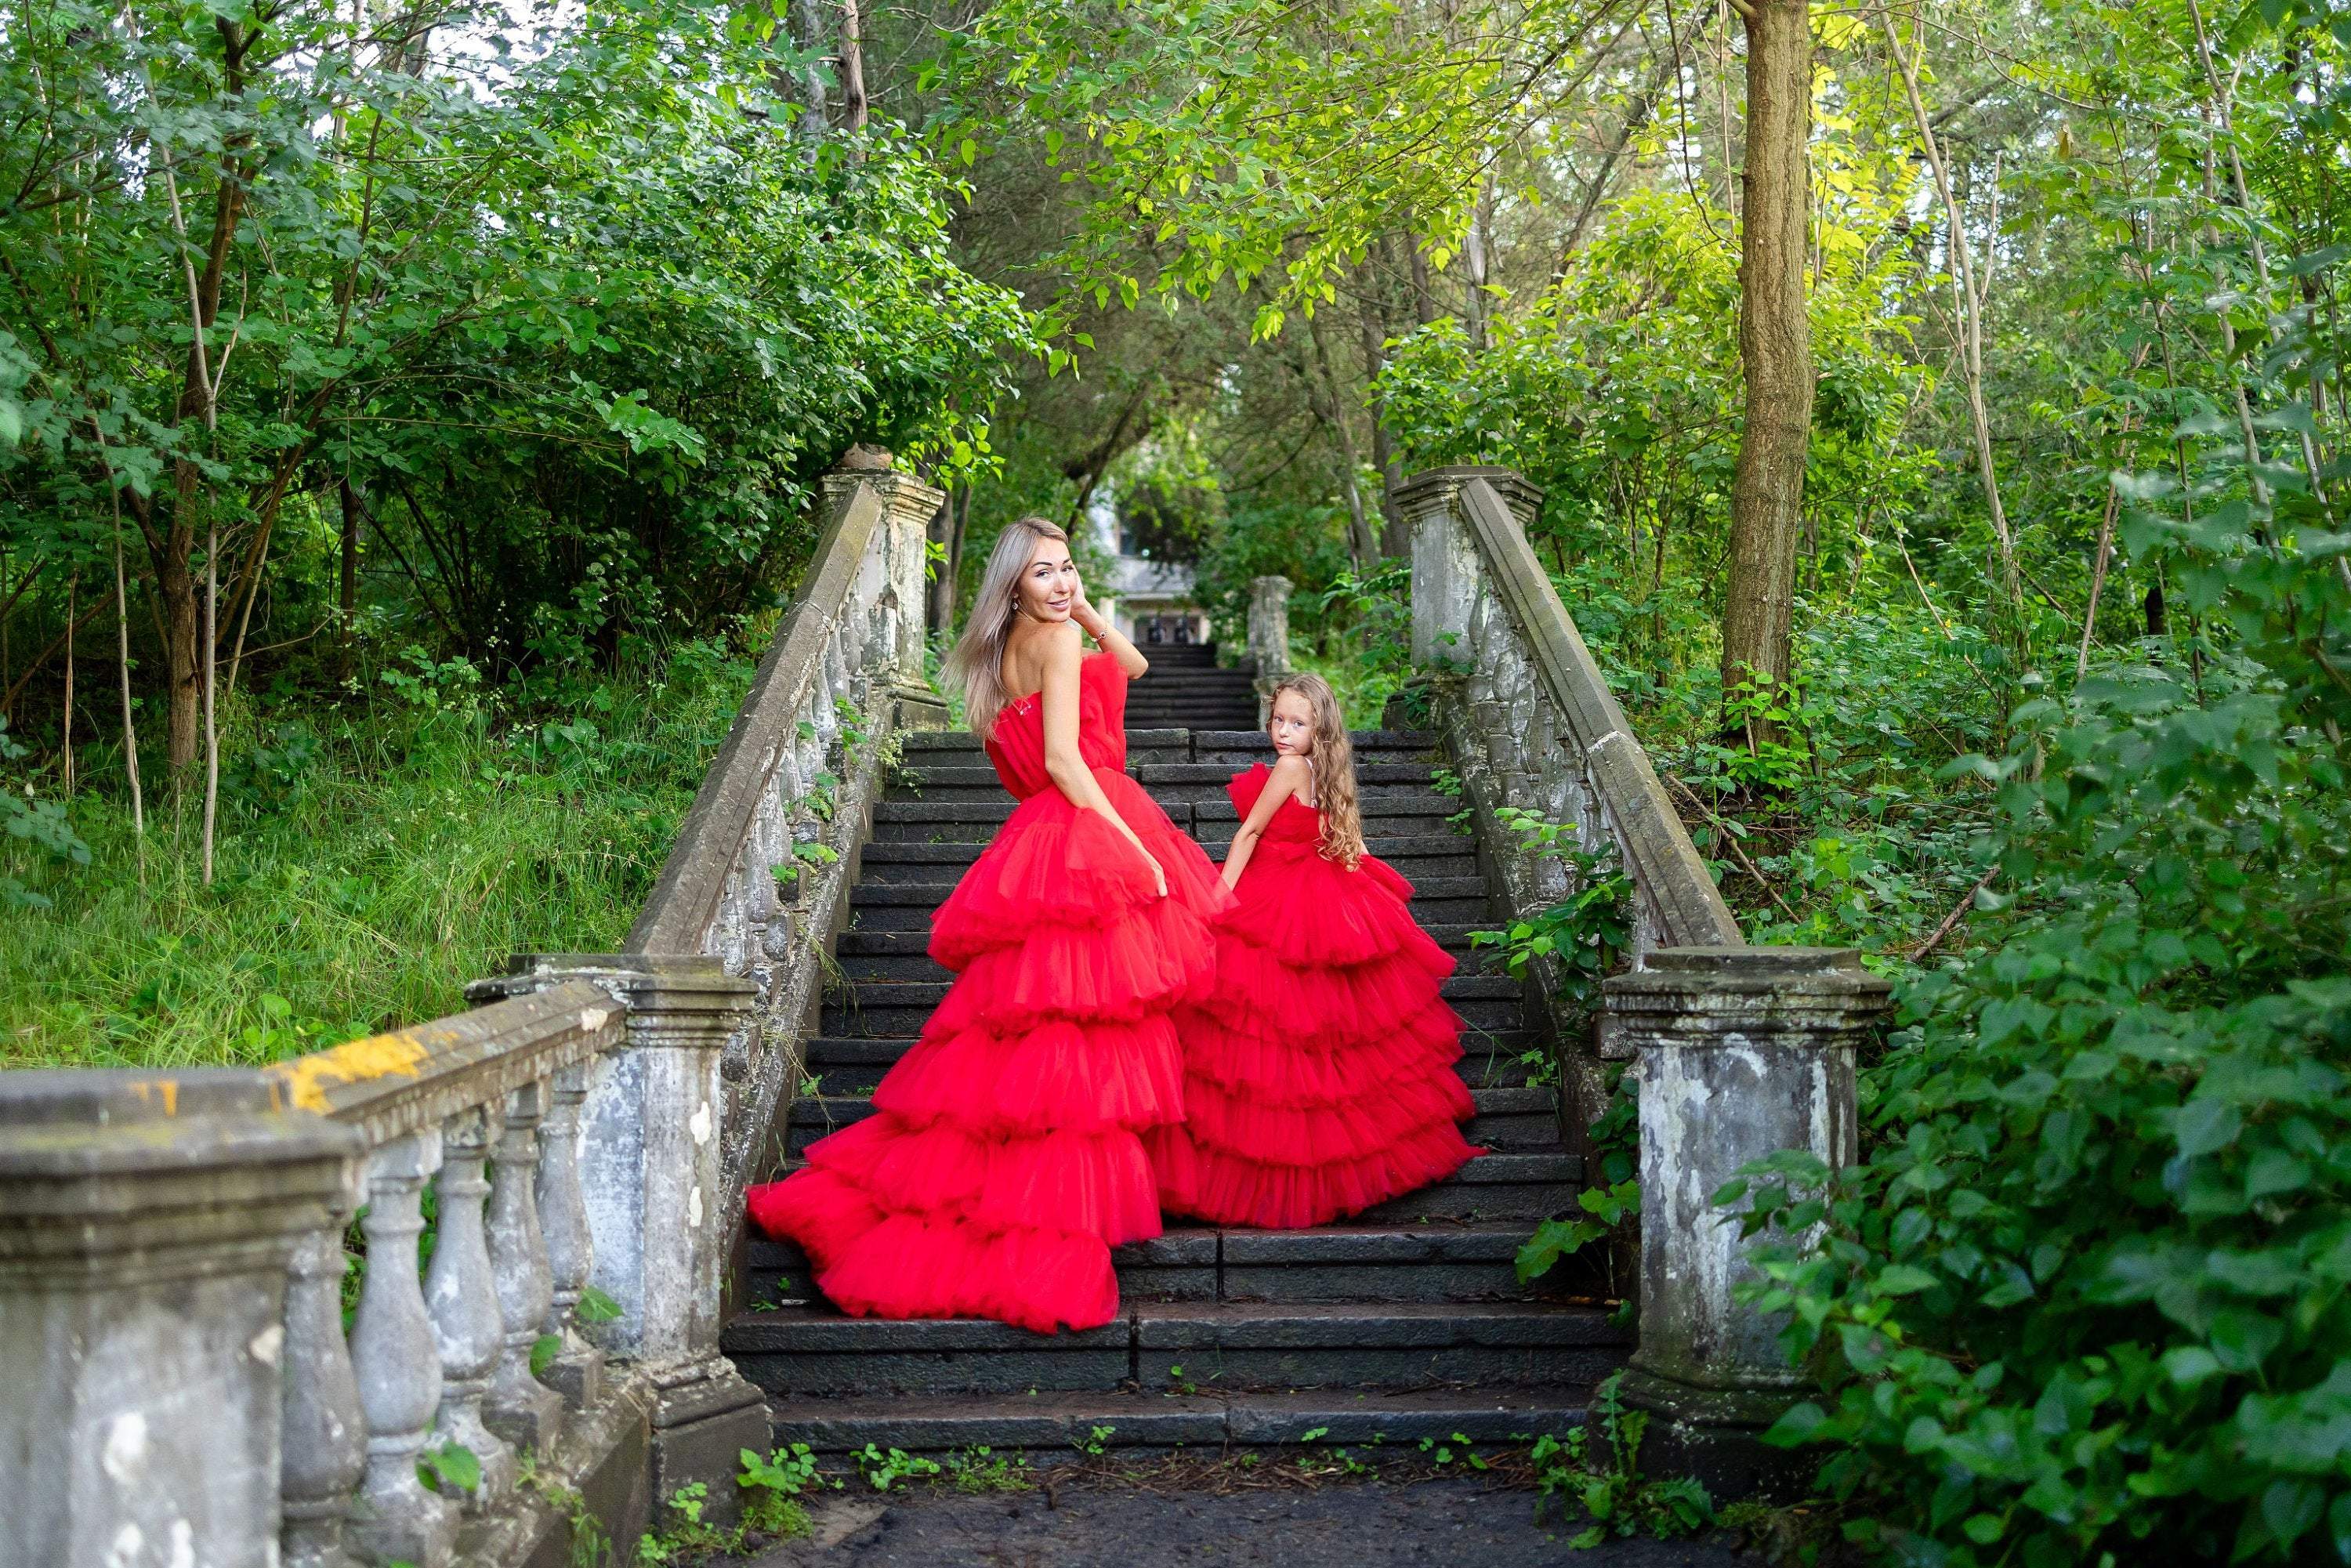 red high low sweet 16 dresses